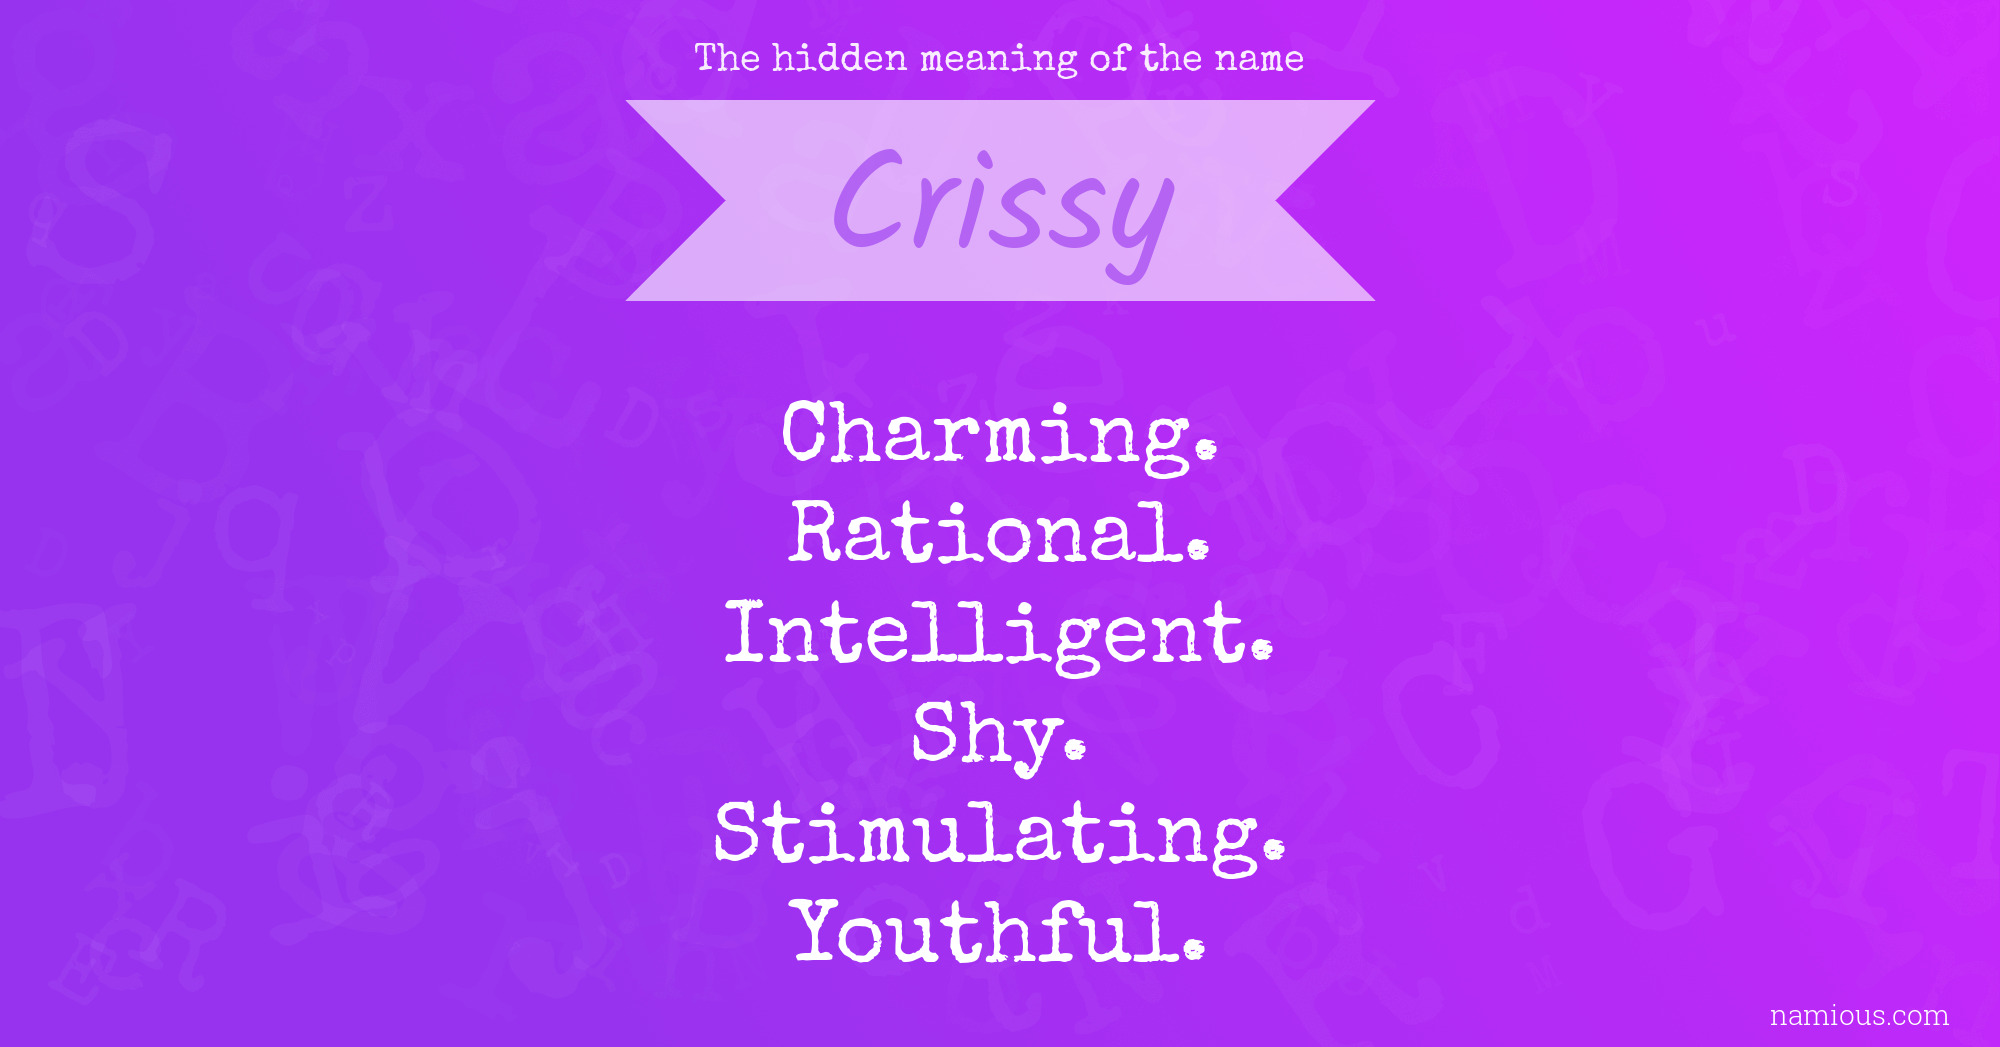 The hidden meaning of the name Crissy